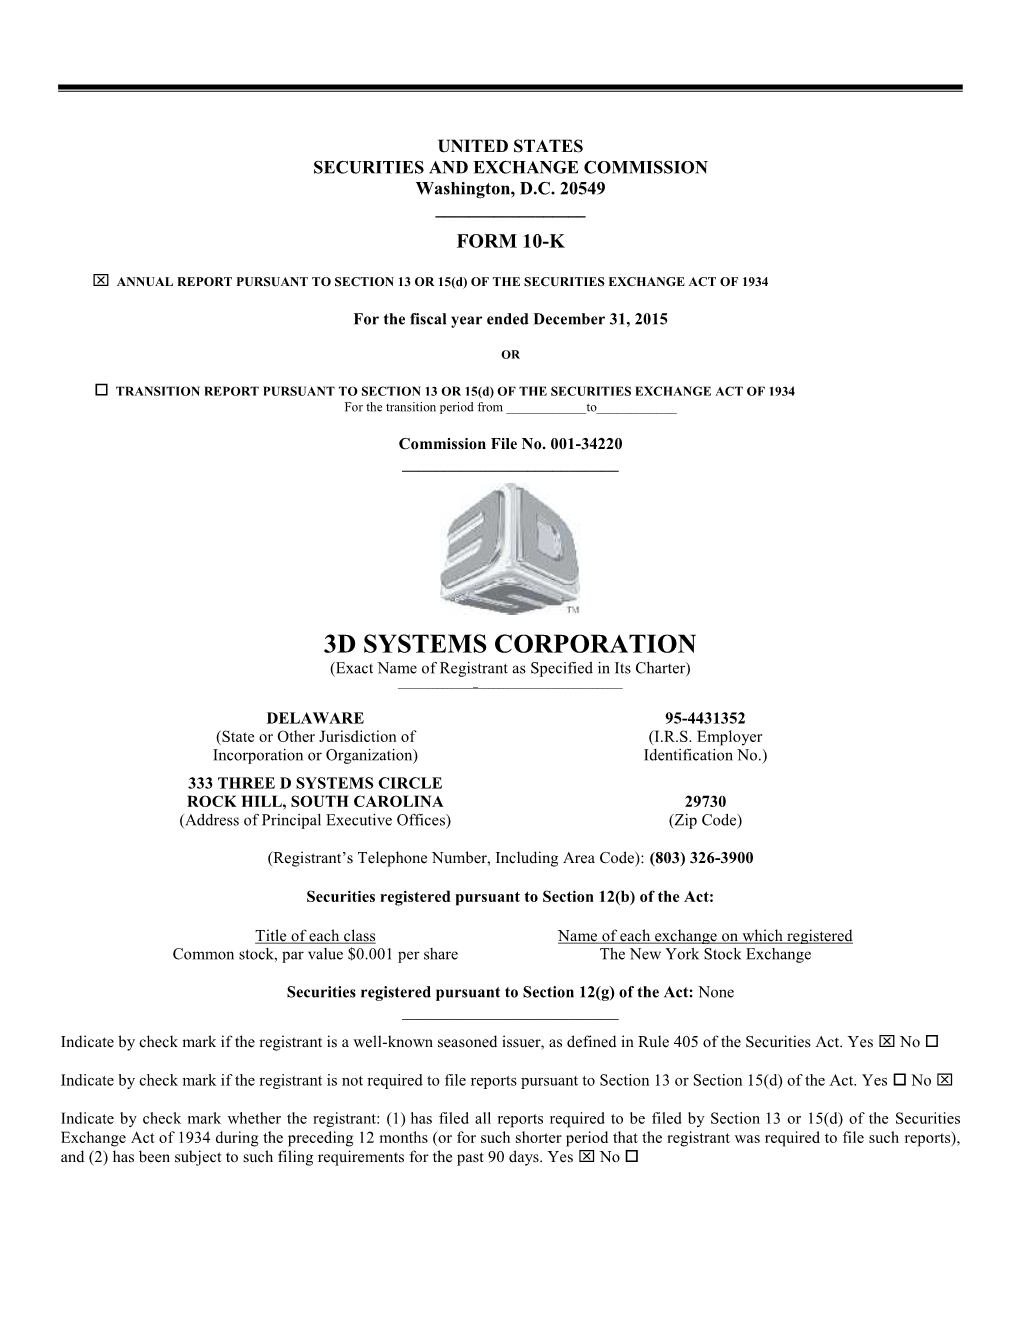 3D SYSTEMS CORPORATION (Exact Name of Registrant As Specified in Its Charter) ______